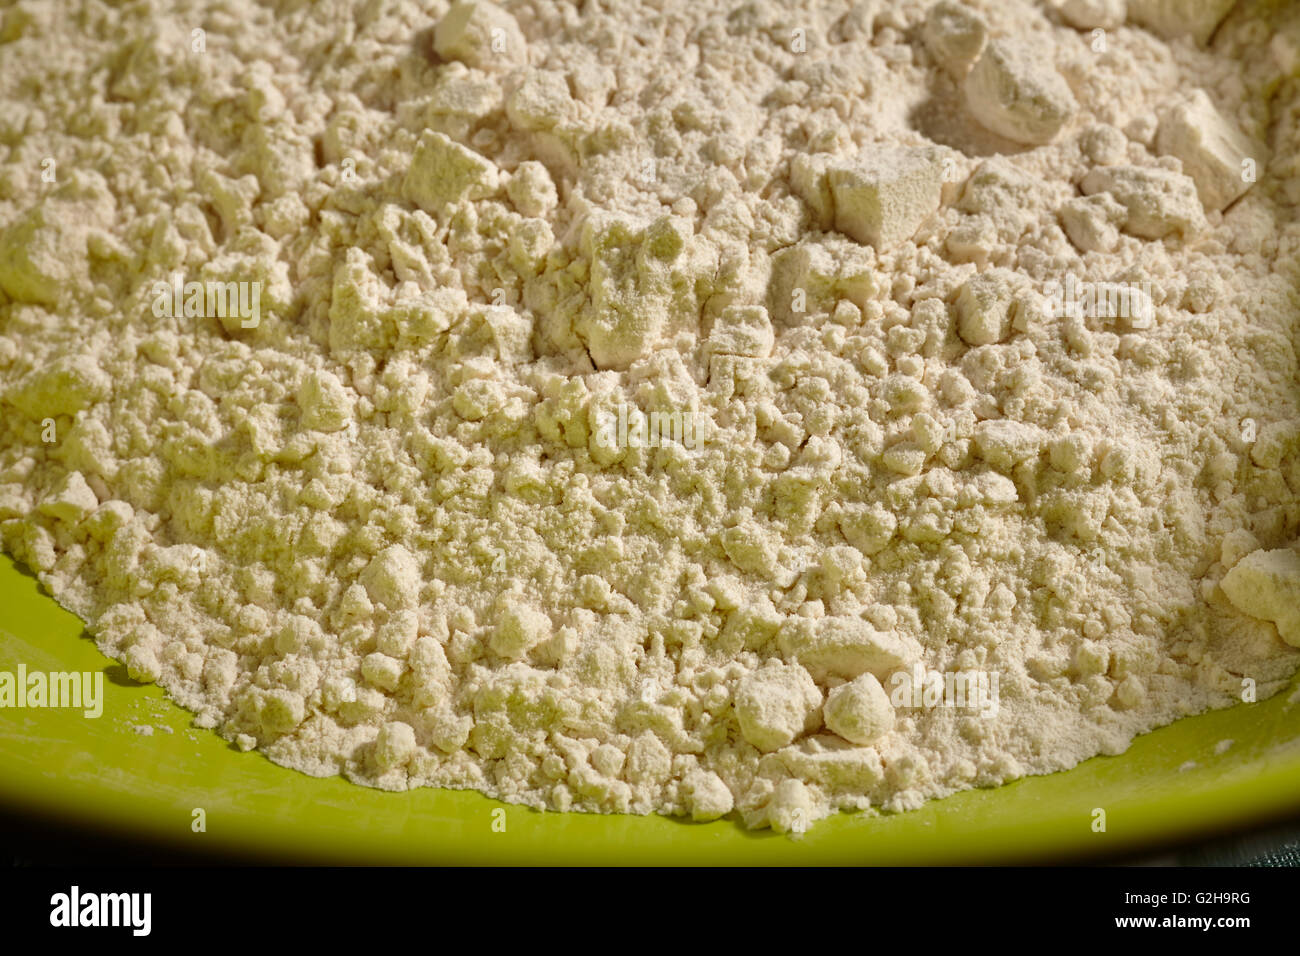 bleached white bread flour, called 'strong' flour in the UK Stock Photo